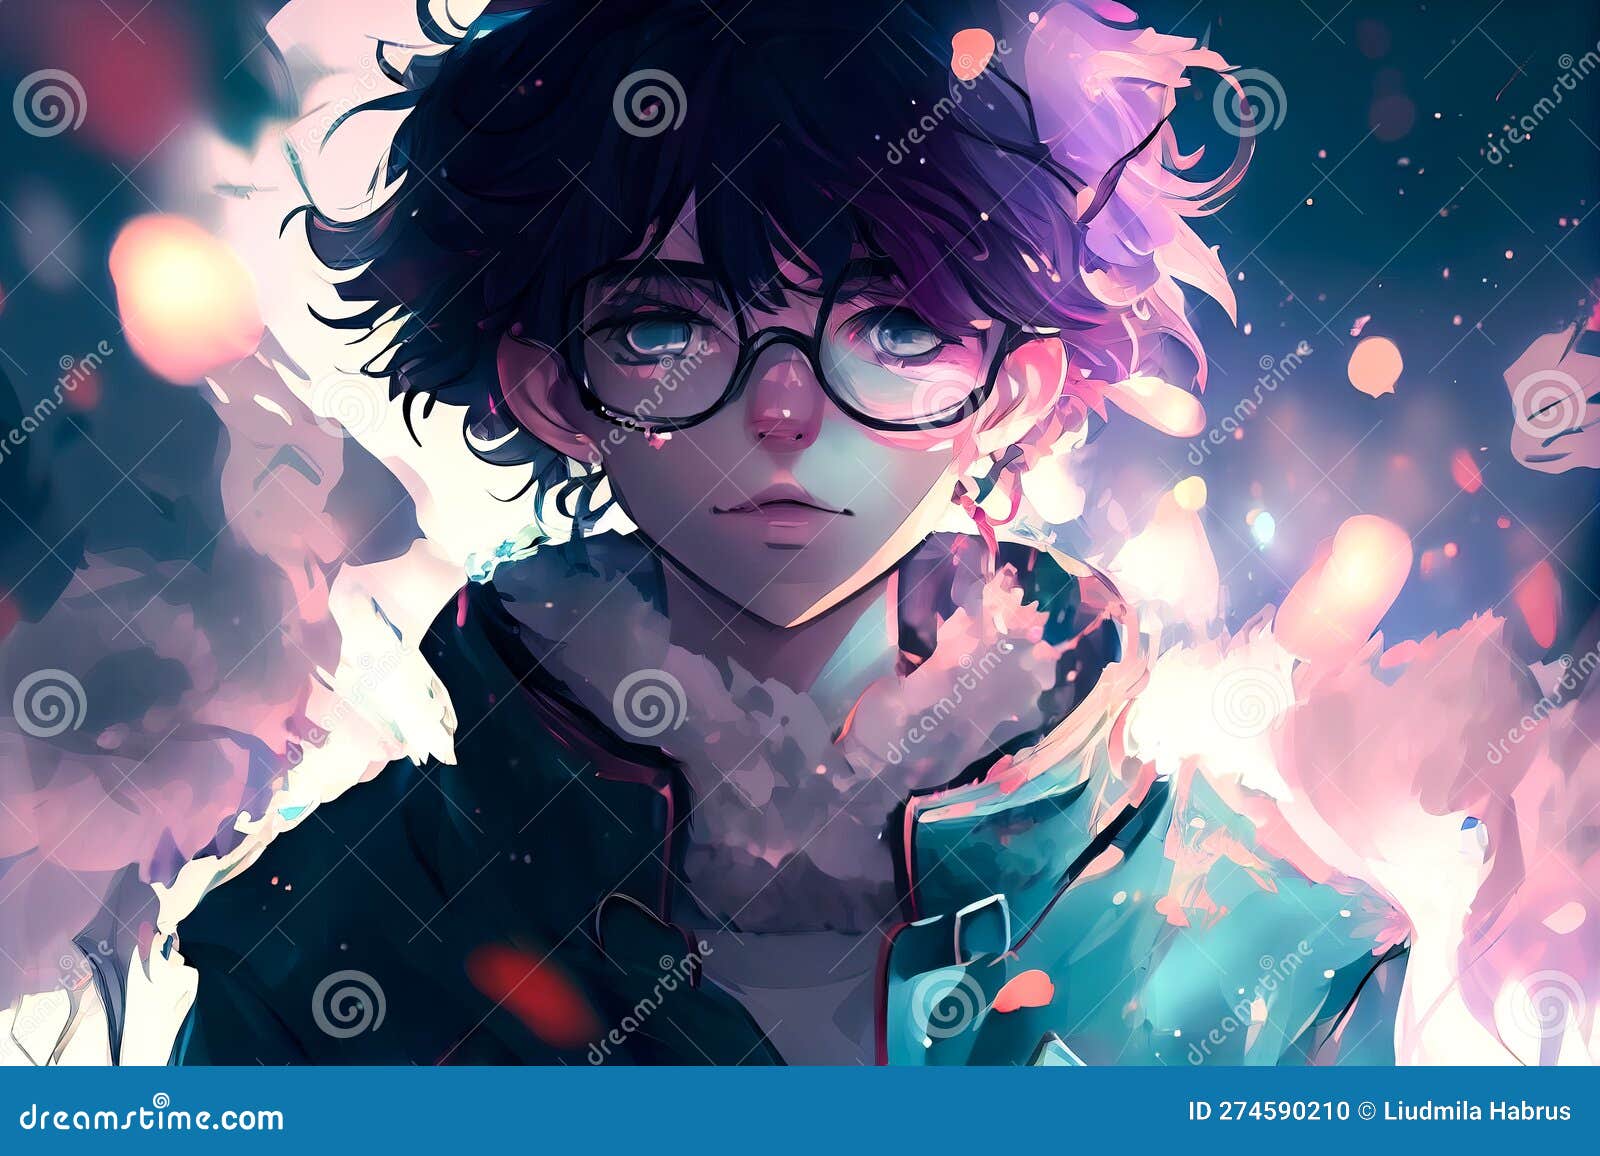 Free download Reason of Anime Characters Ovesized Eyes LovelyTab 1024x640  for your Desktop Mobile  Tablet  Explore 30 Aesthetic Anime Wallpapers   Aesthetic Wallpaper Aesthetic Wallpaper Anime Cute Aesthetic Wallpapers